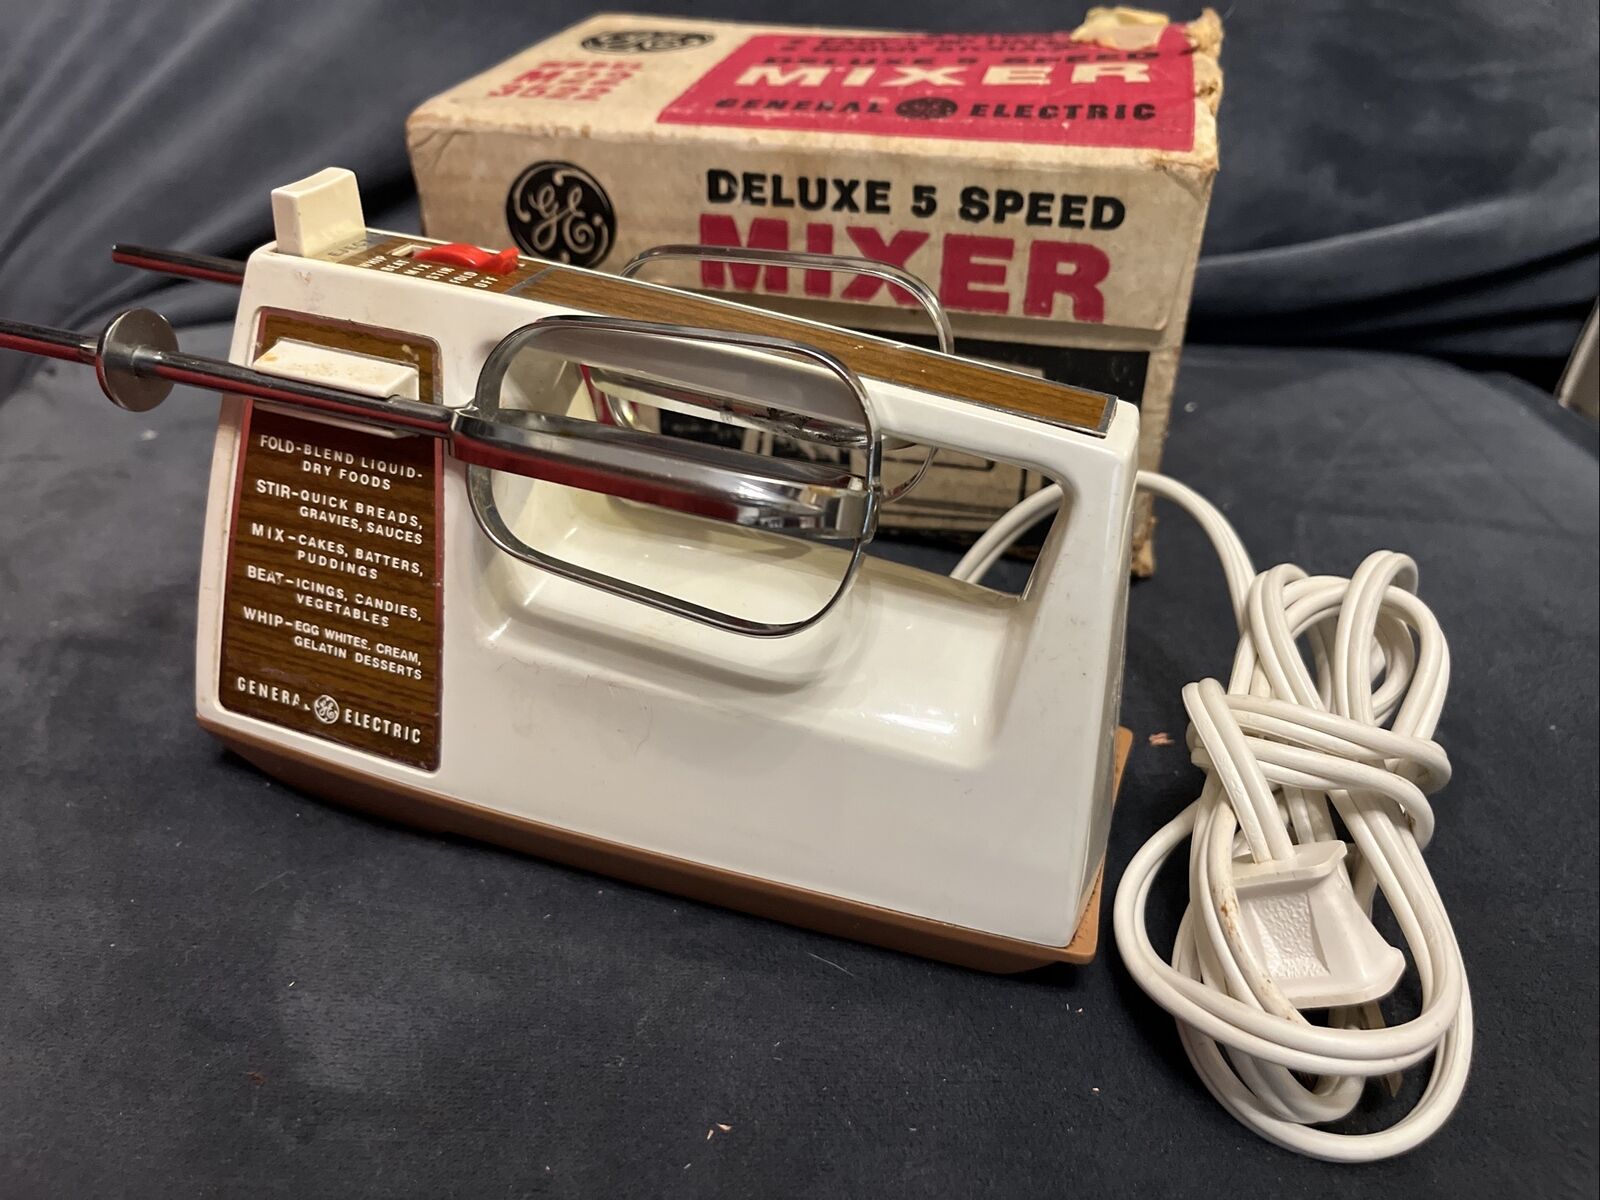 Vintage GE General Electric Deluxe 5 Speed Mixer M22 3522 ALMOND IN BOX USA